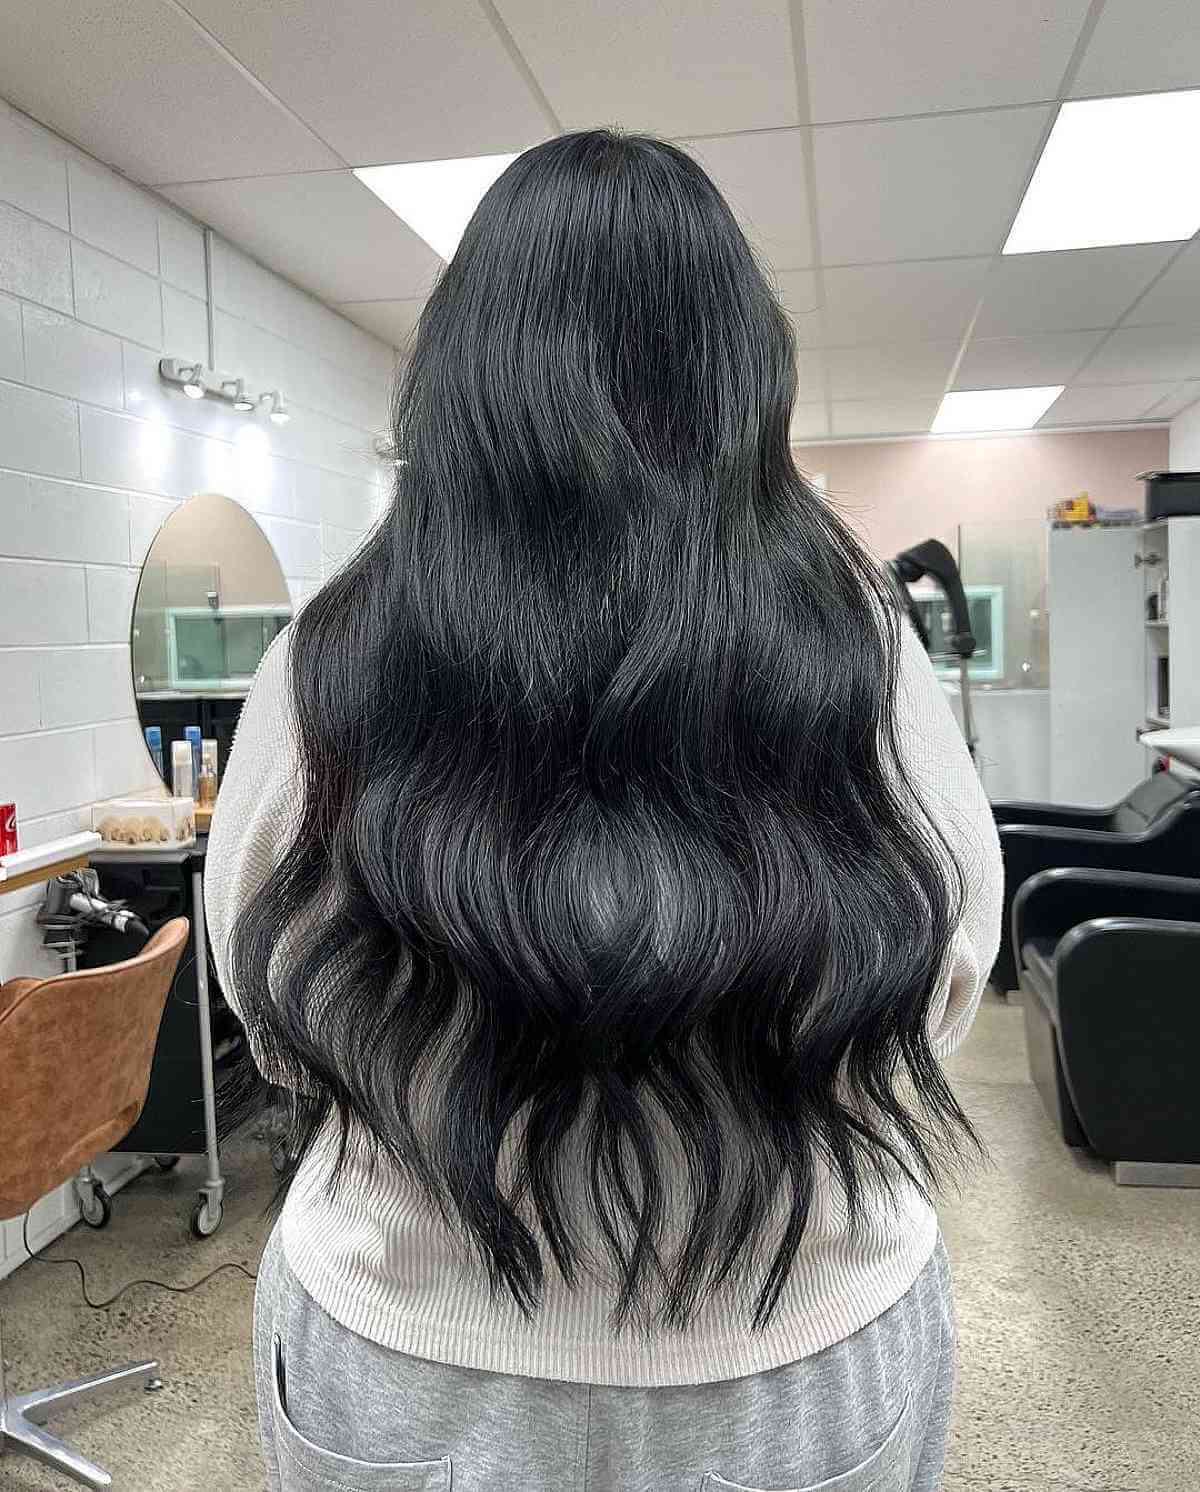 Tousled long black hair with waves